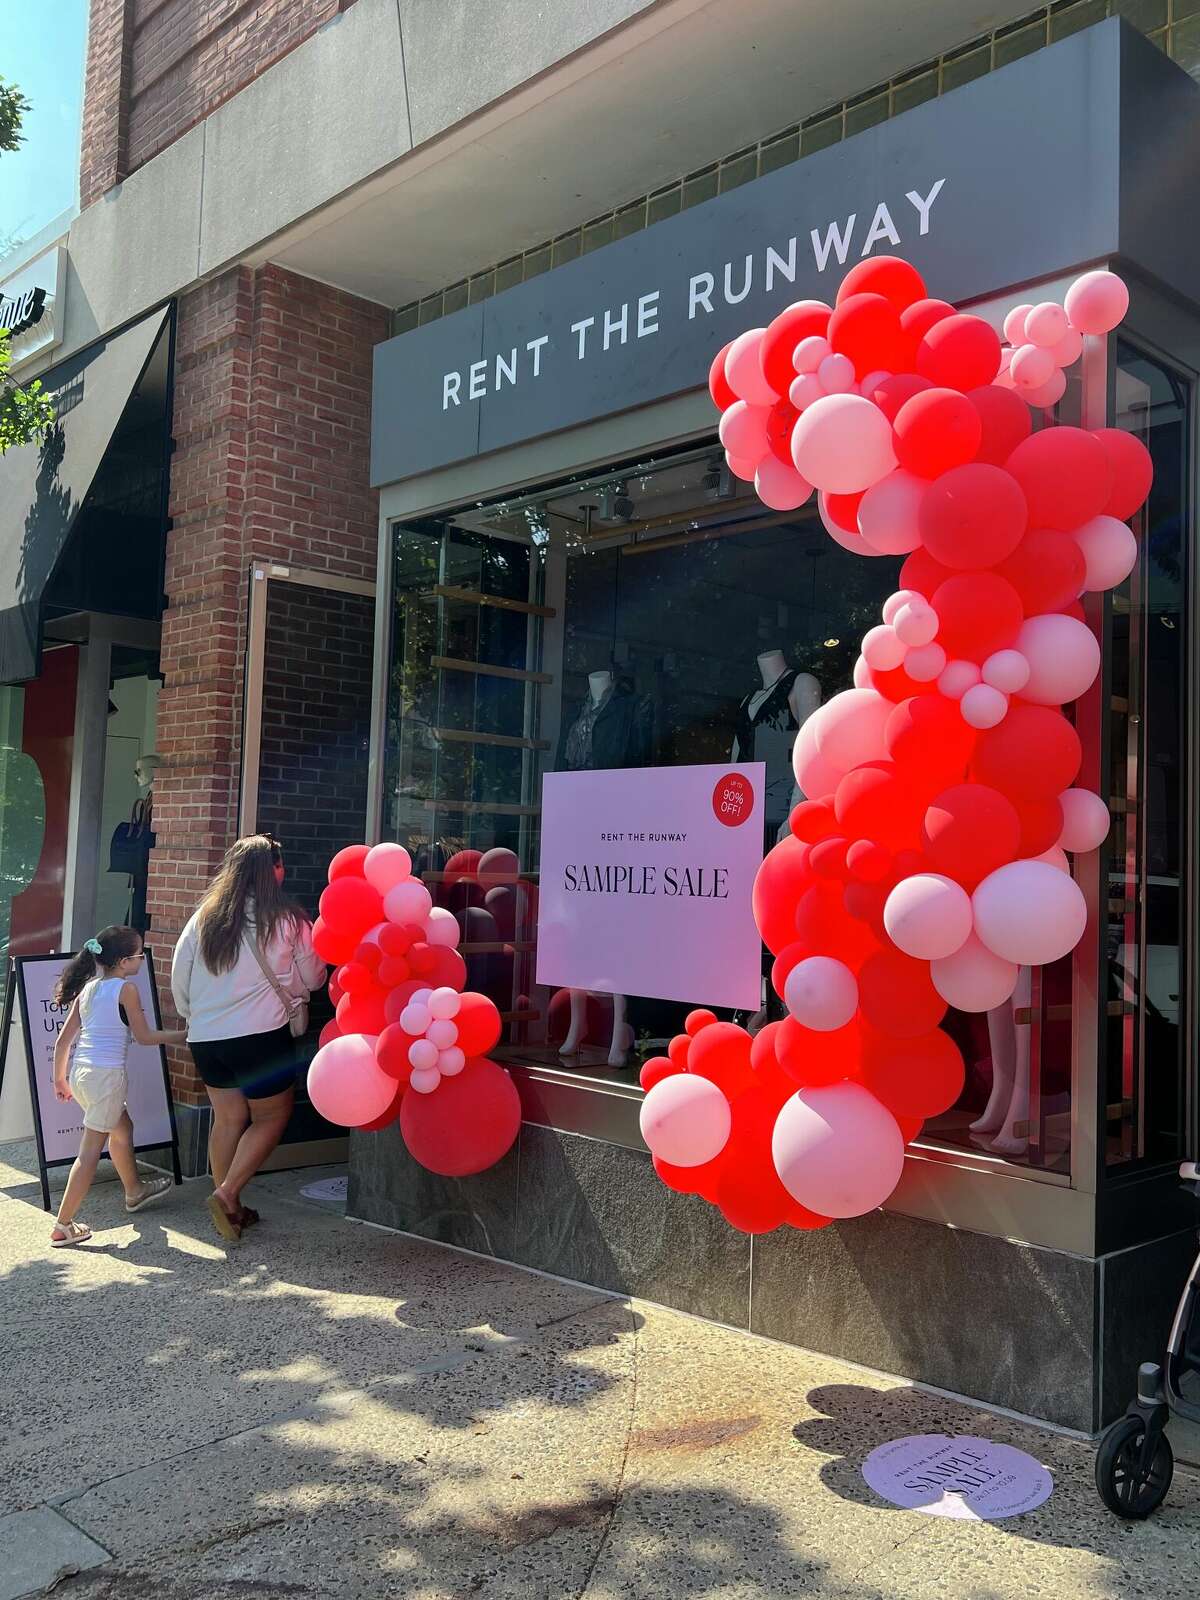 Rent the Runway, which offers thousands of designer clothing, accessories and home décor items for rent, is hosting a temporary sample sale at 200 Greenwich Ave., Suite B, in Greenwich, Conn. through Oct. 16, 2022.